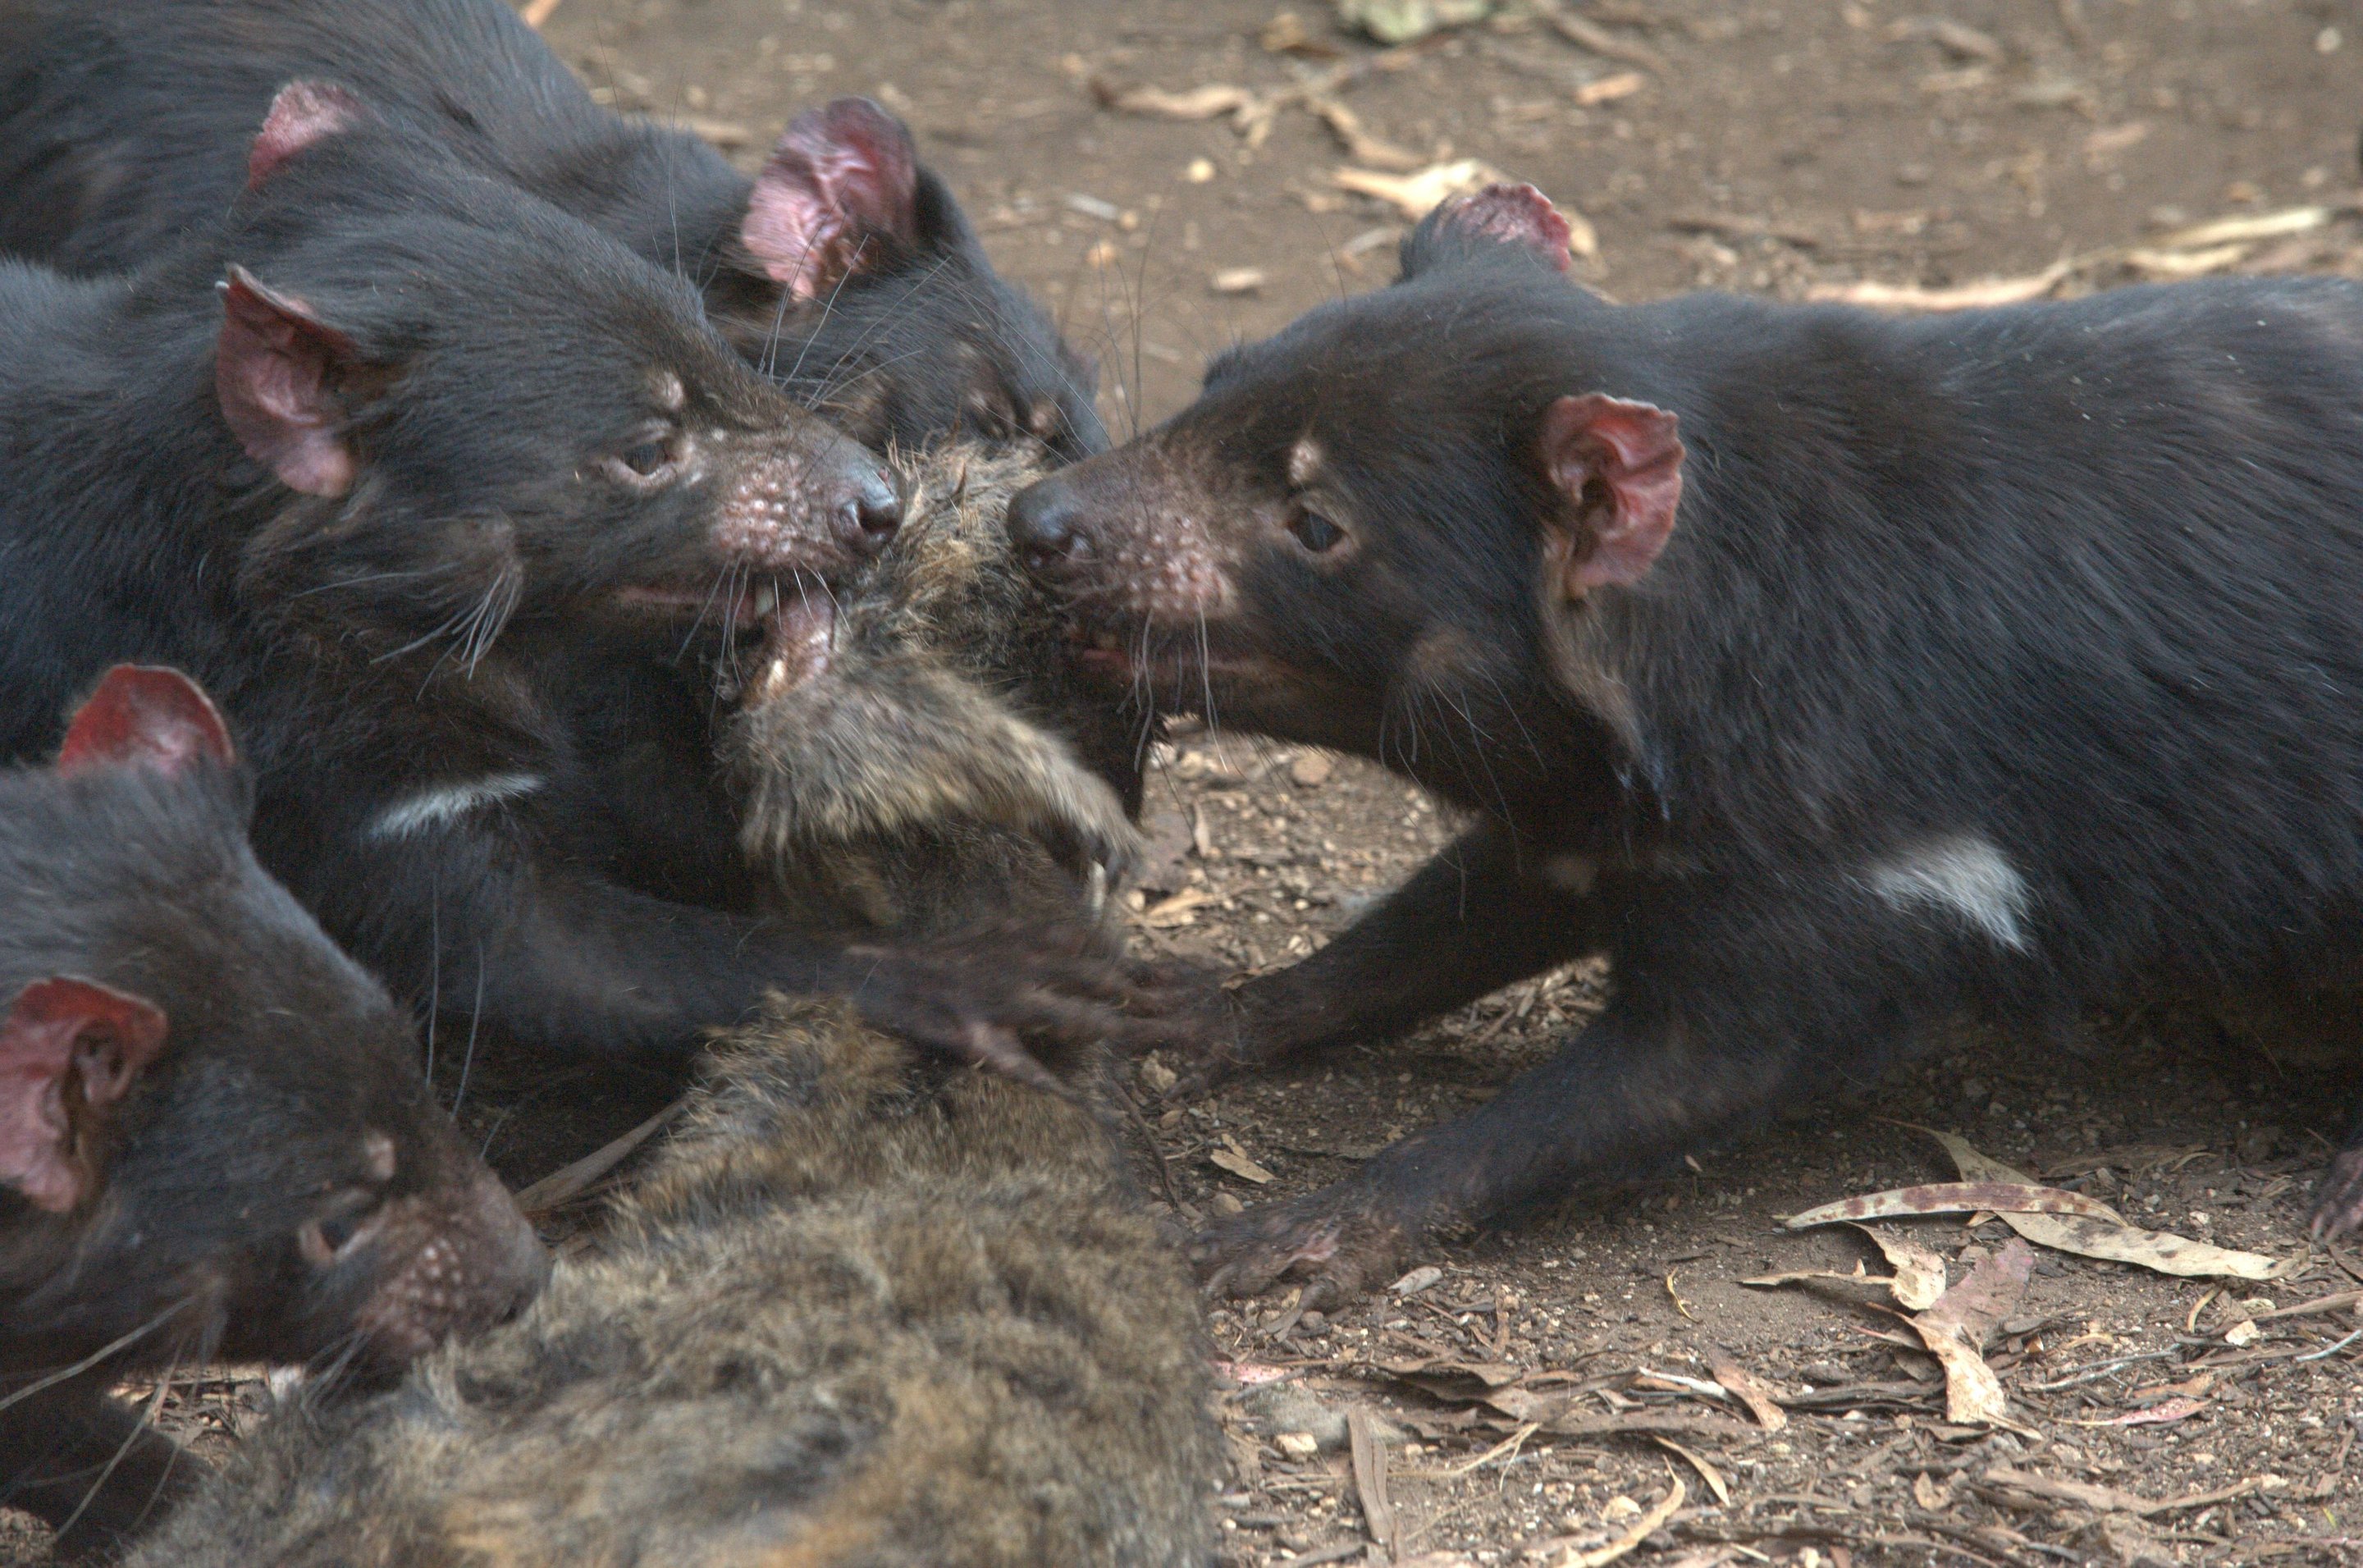 Tassie devils' decline has left a feast of carrion for feral cats